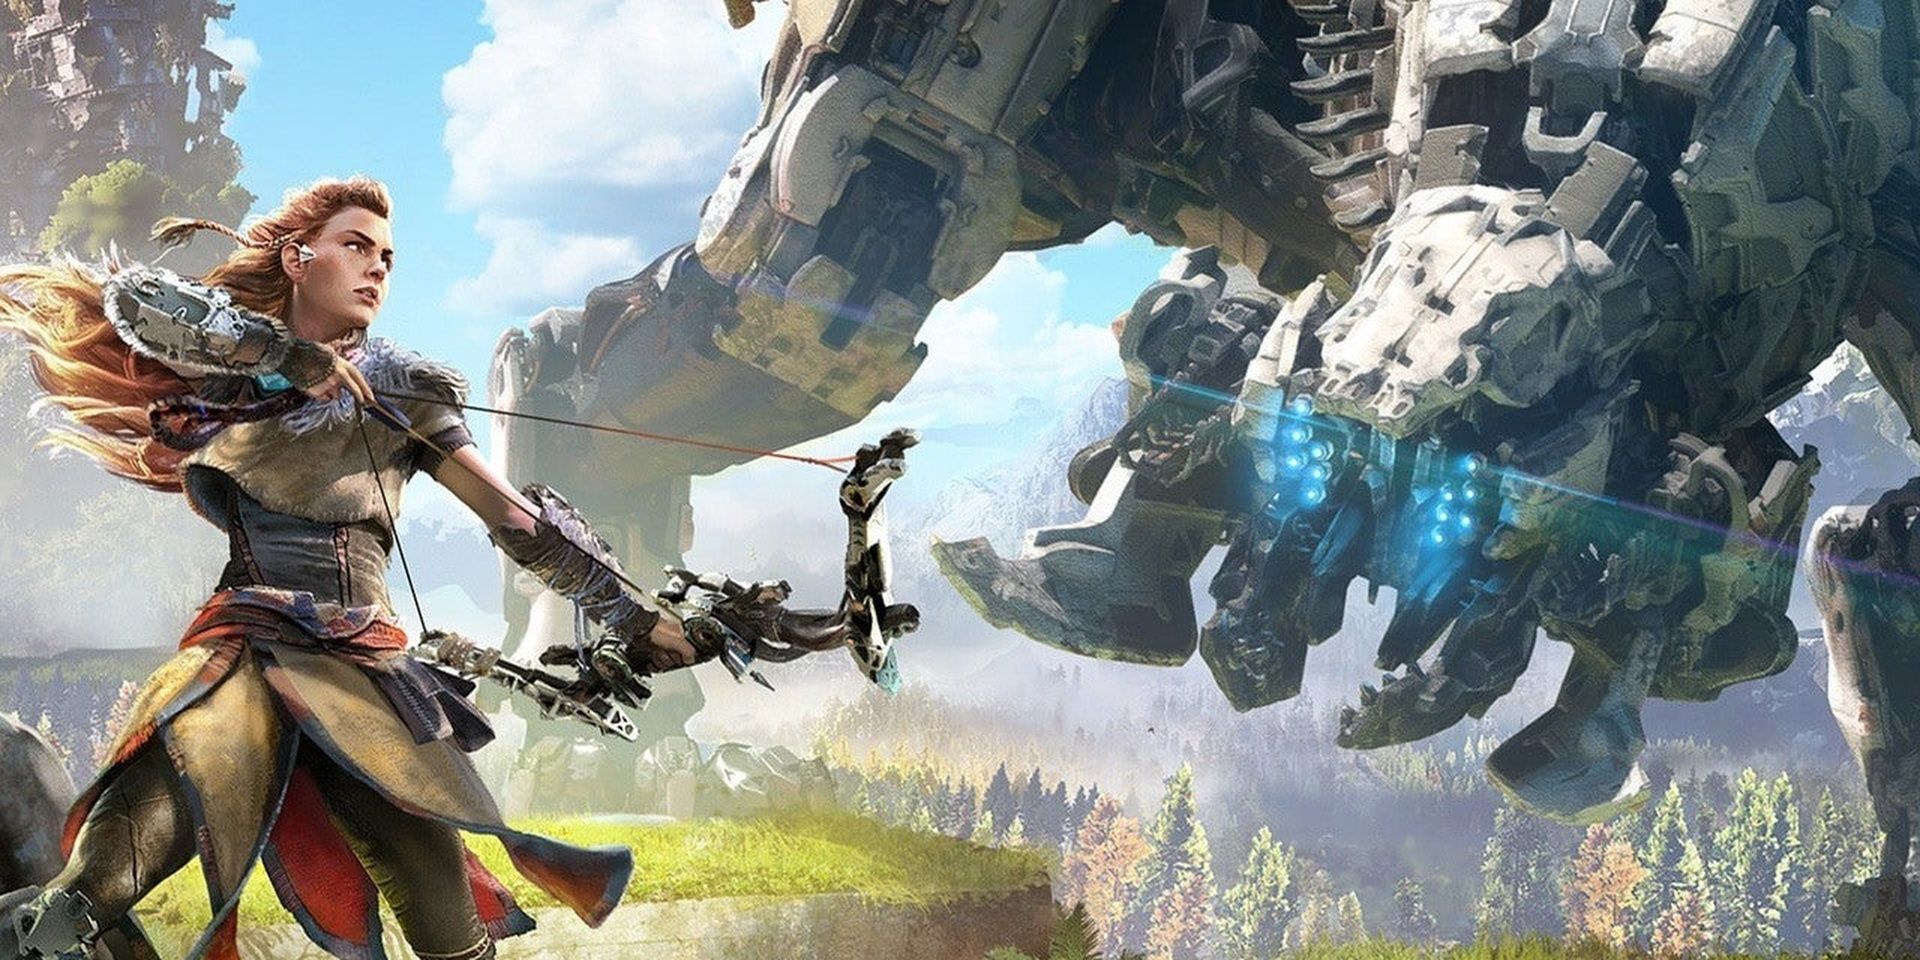 mage of Aloy from Horizon Zero Dawn battling a large mech